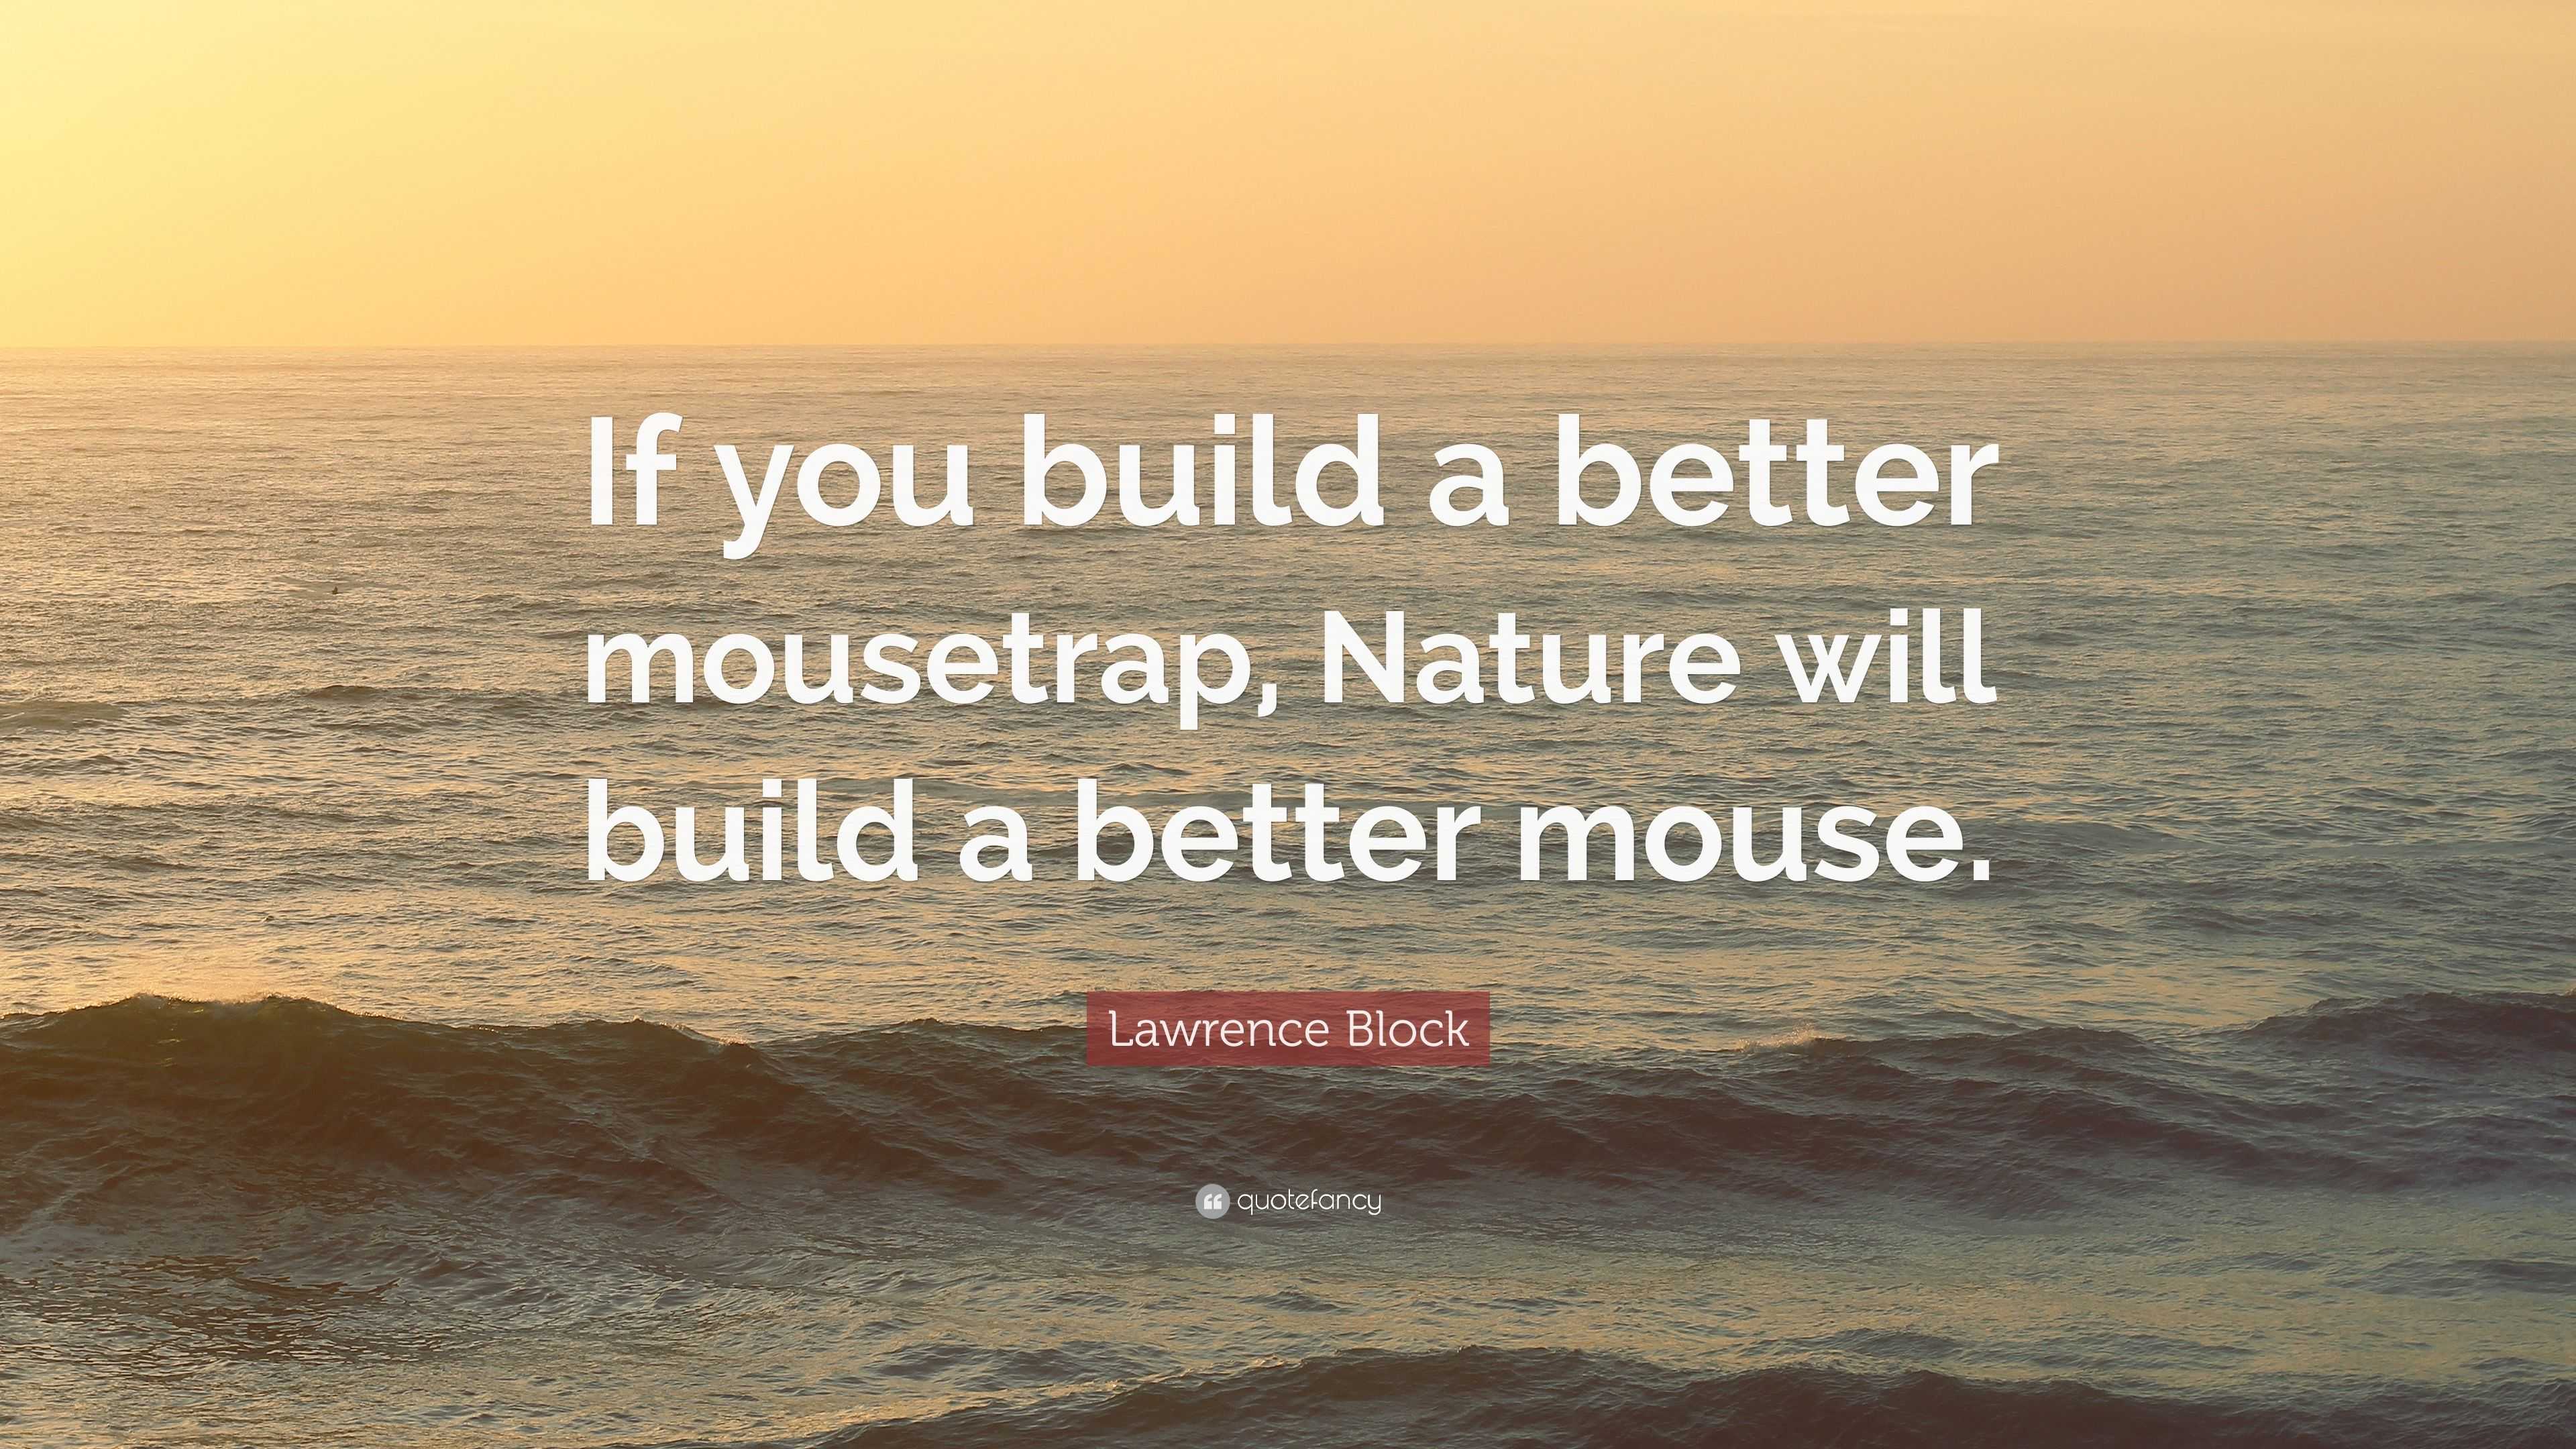 https://quotefancy.com/media/wallpaper/3840x2160/2993740-Lawrence-Block-Quote-If-you-build-a-better-mousetrap-Nature-will.jpg